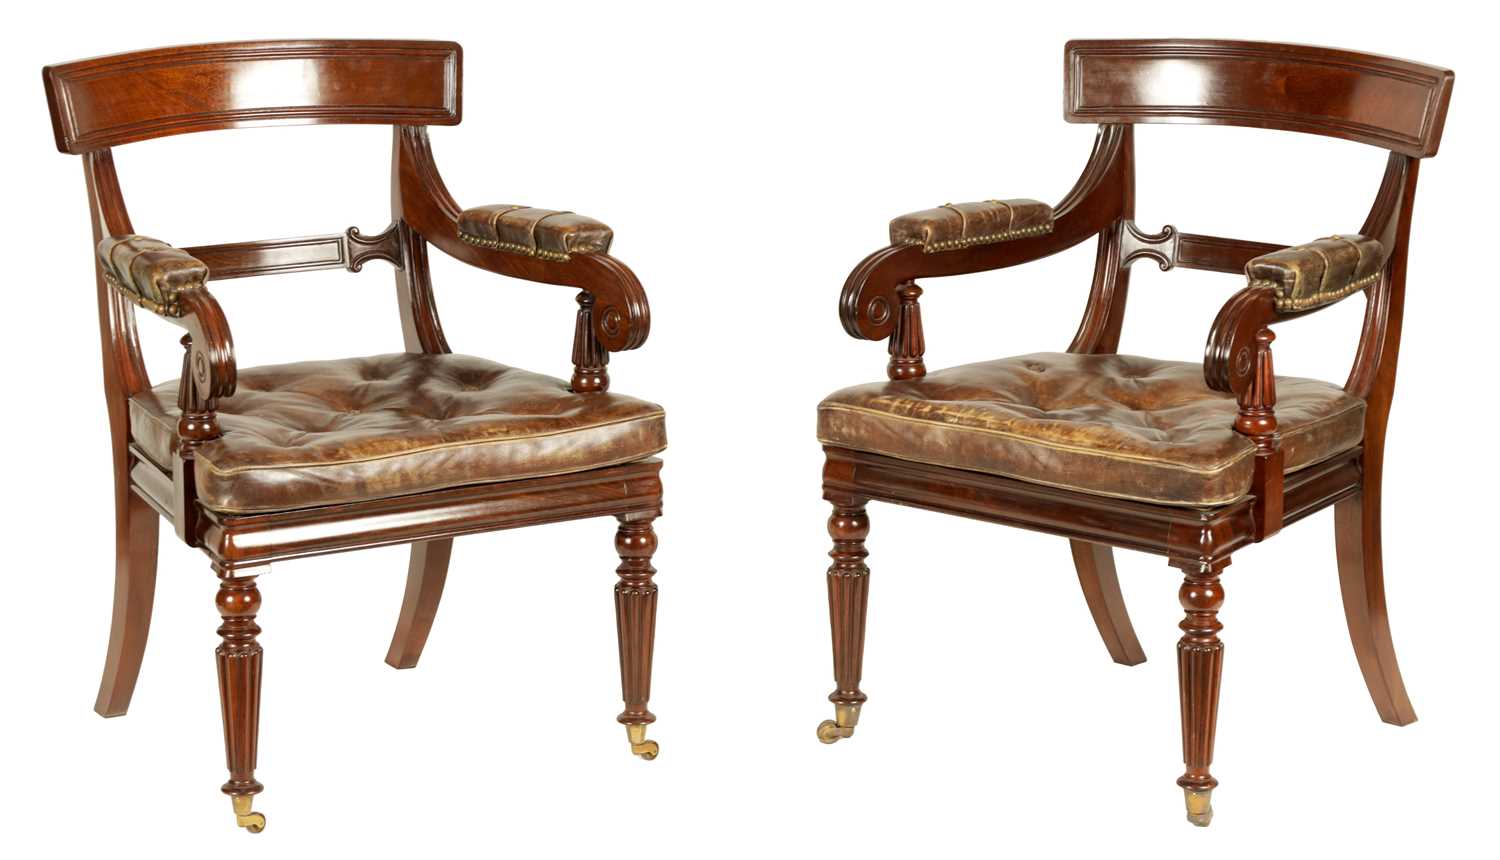 A GOOD PAIR OF REGENCY STYLE MAHOGANY DESK CHAIRS IN THE MANNER OF GILLOWS